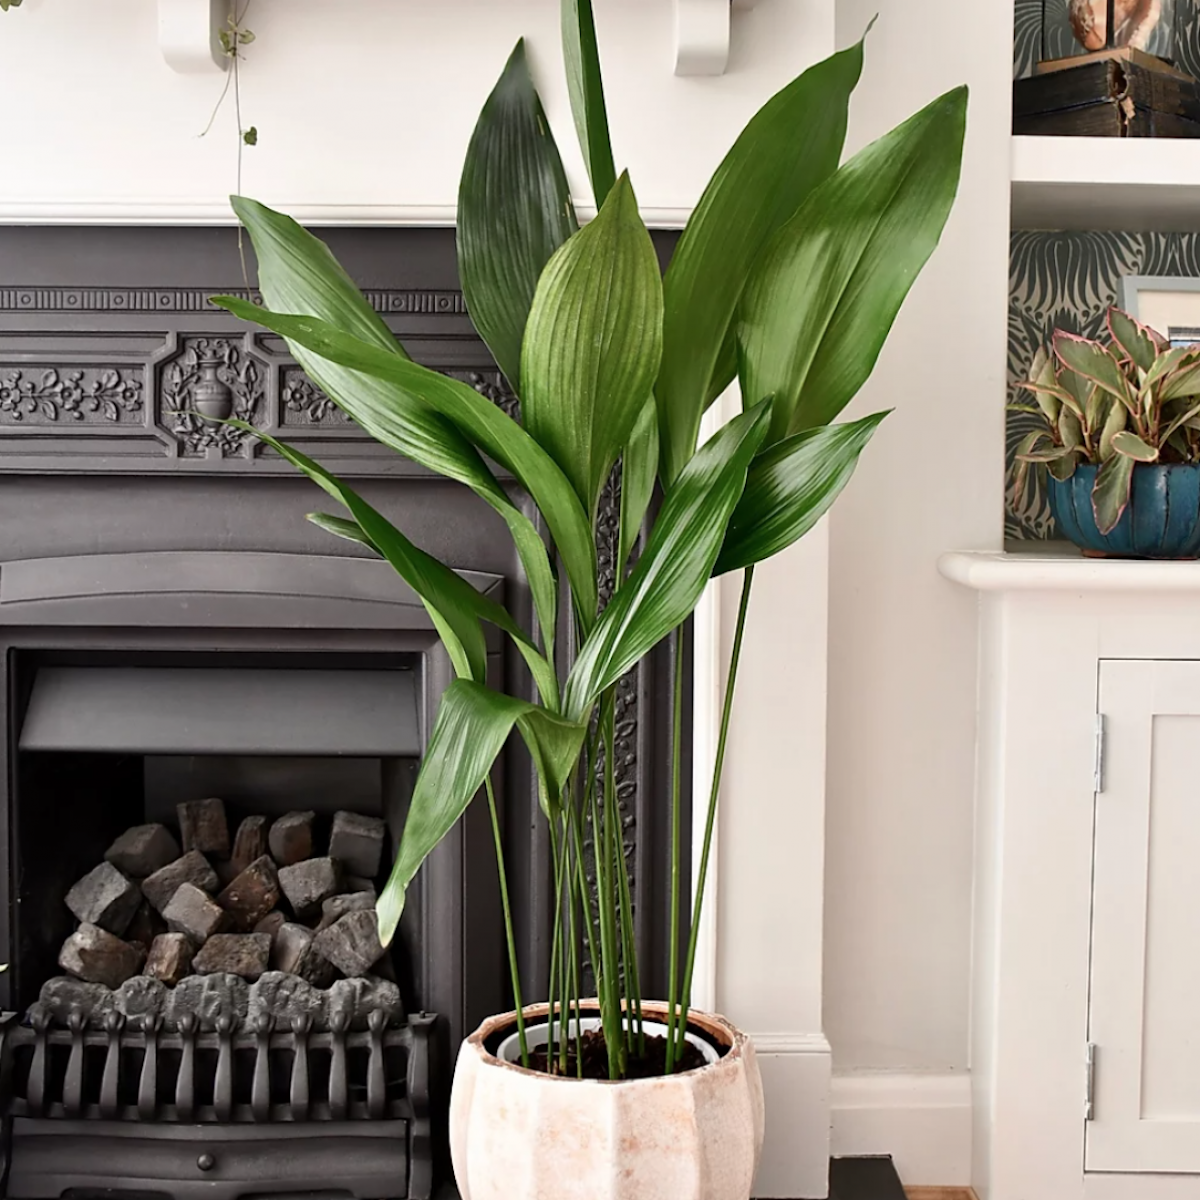 11 tall, statement plants to decorate your home and office